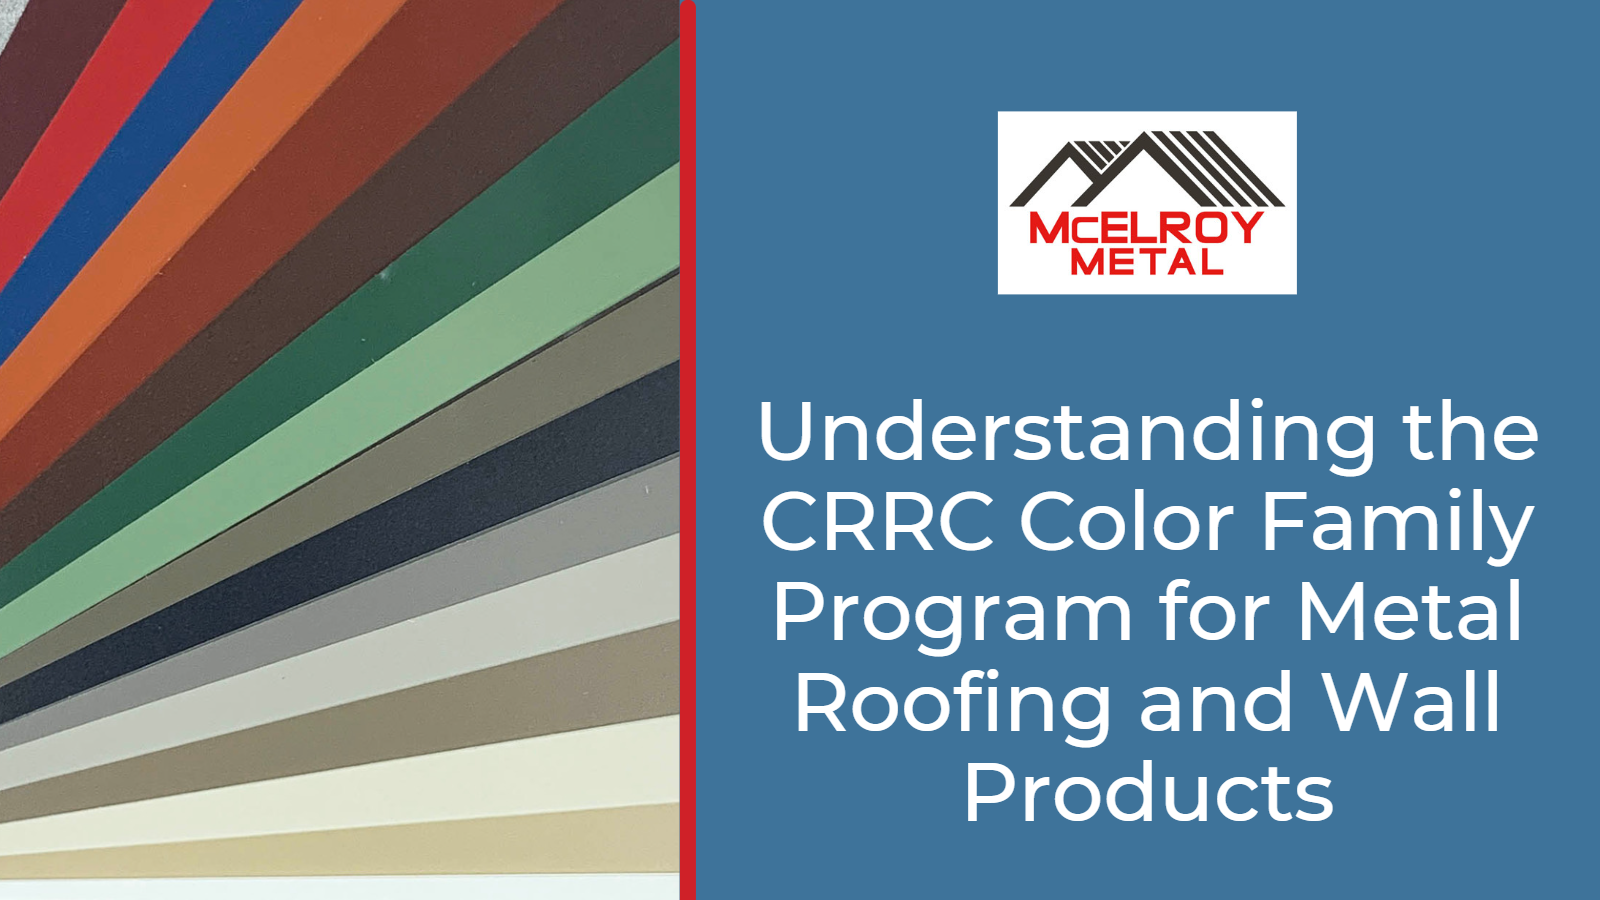 Understanding the CRRC Color Family Program for Metal Roofing and Wall Products